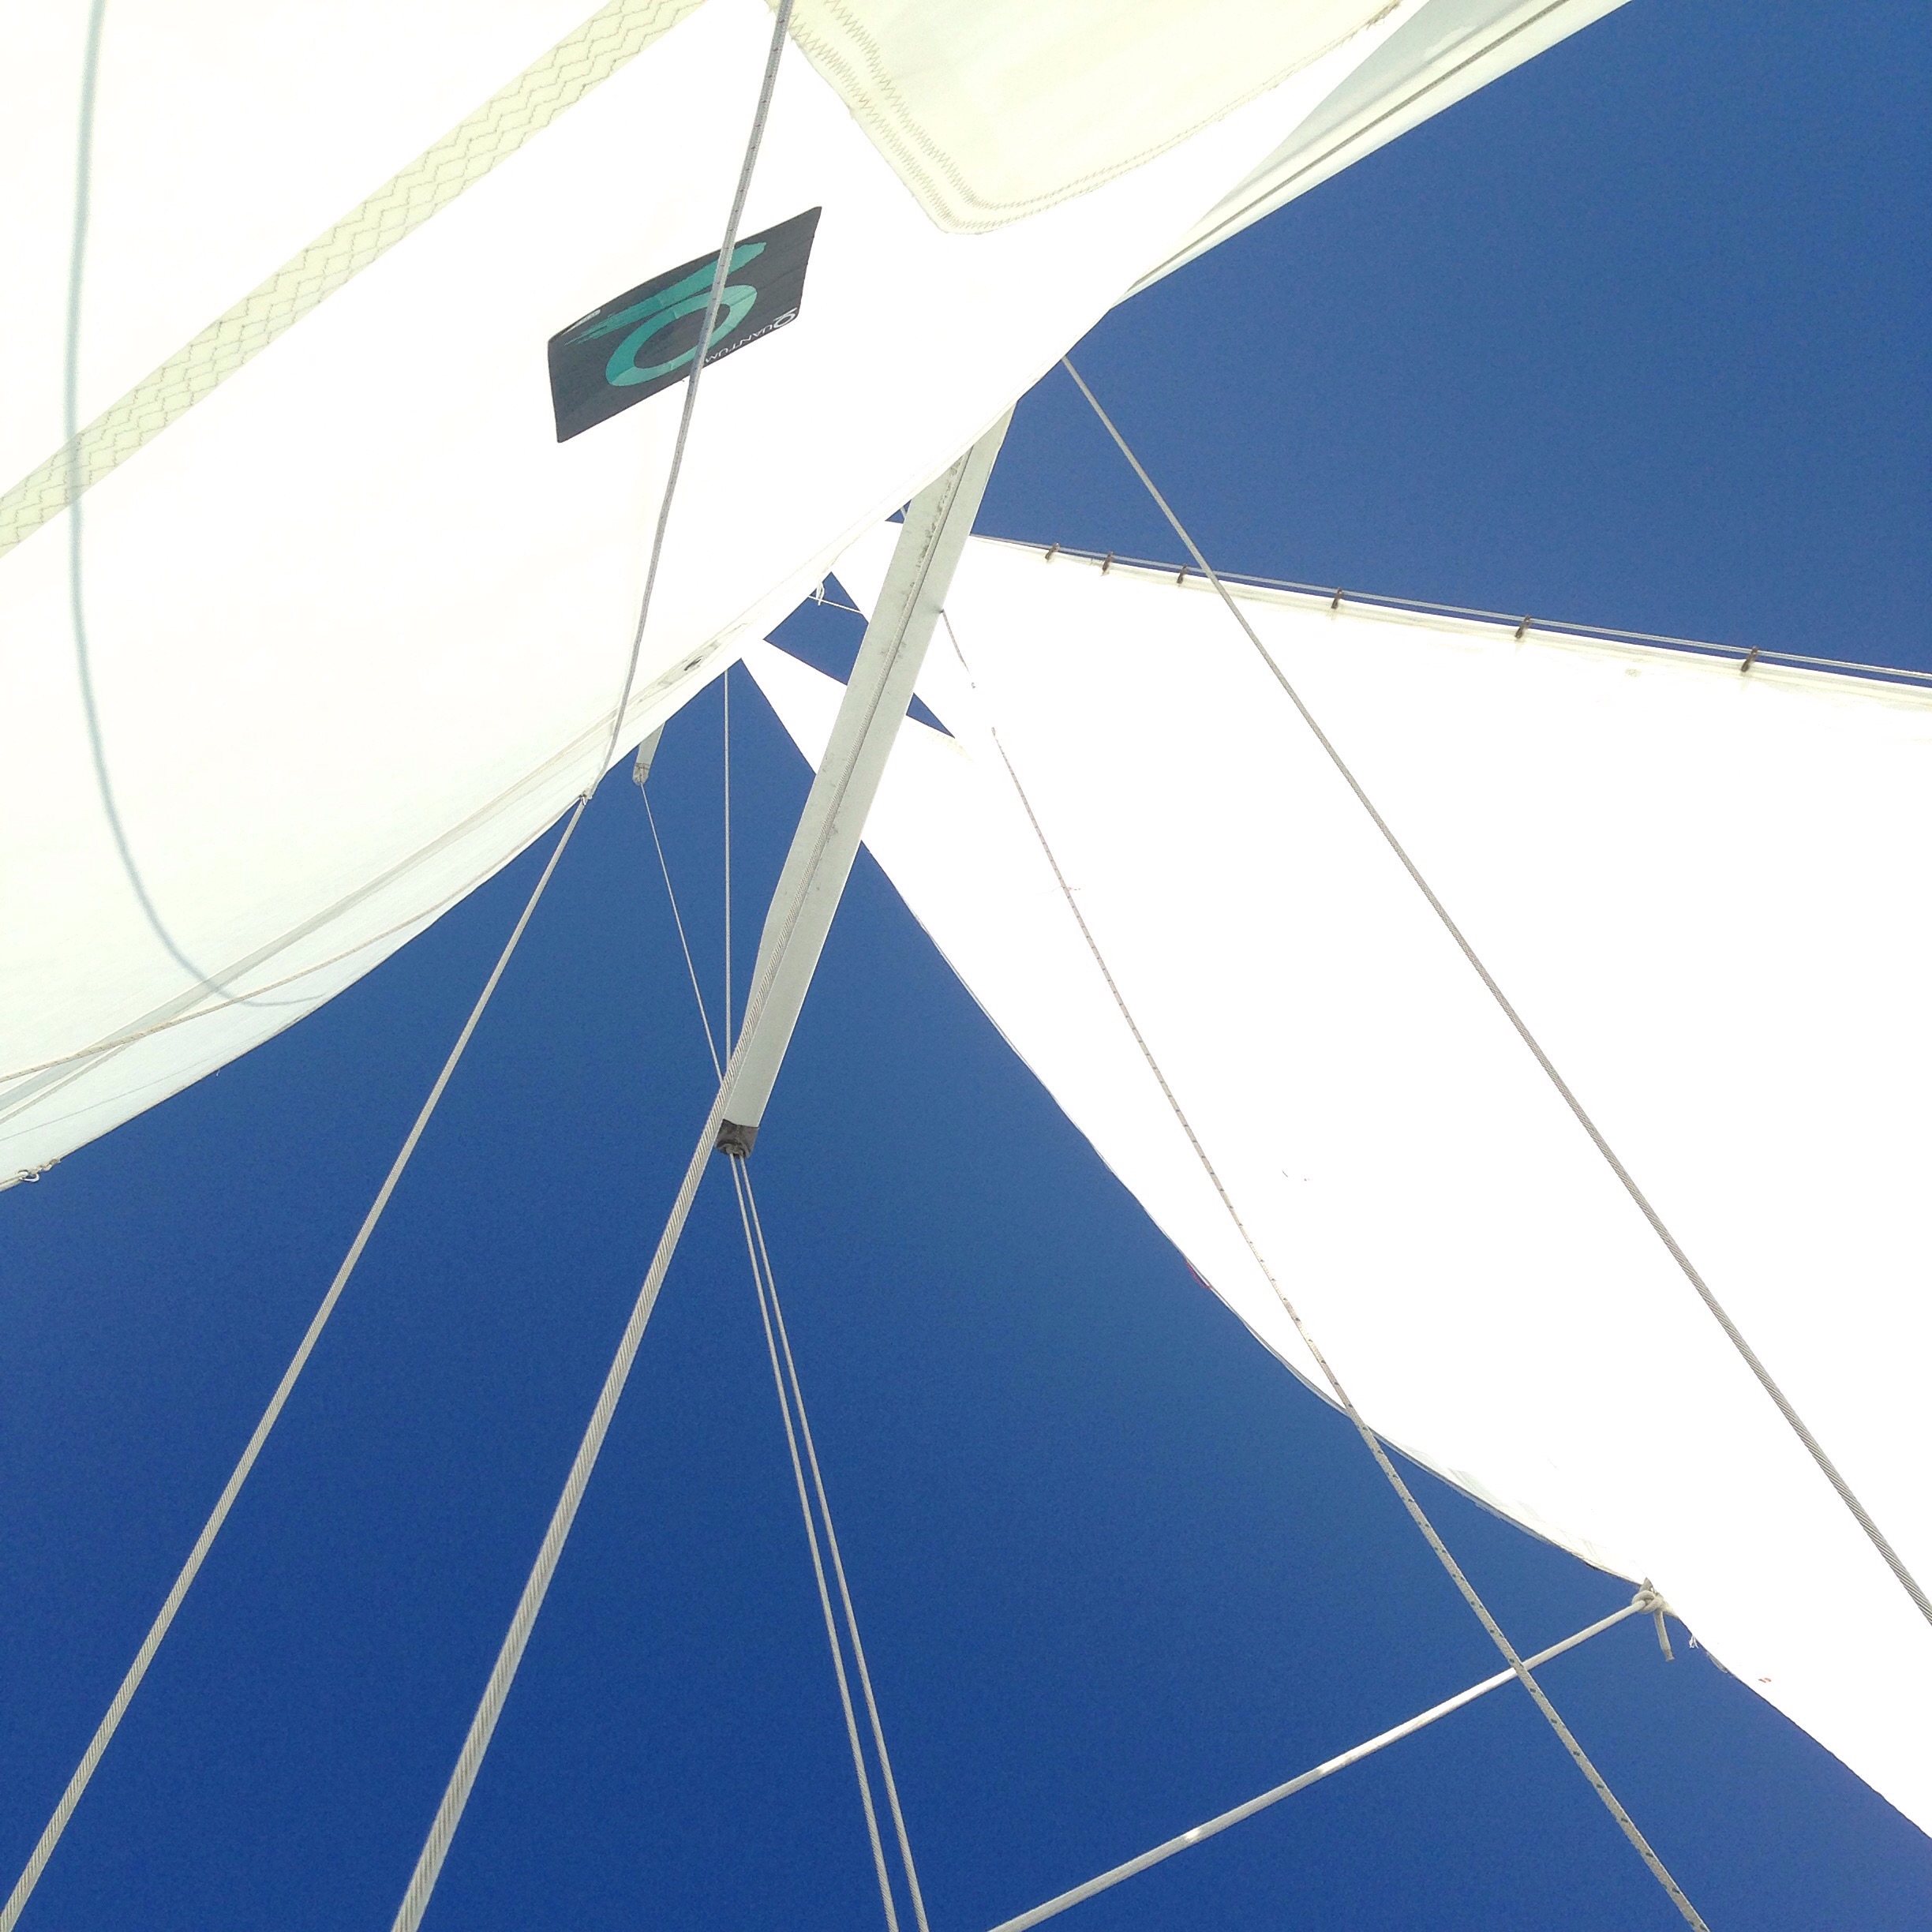 Looking up at pure blue skies through the schooners white sails